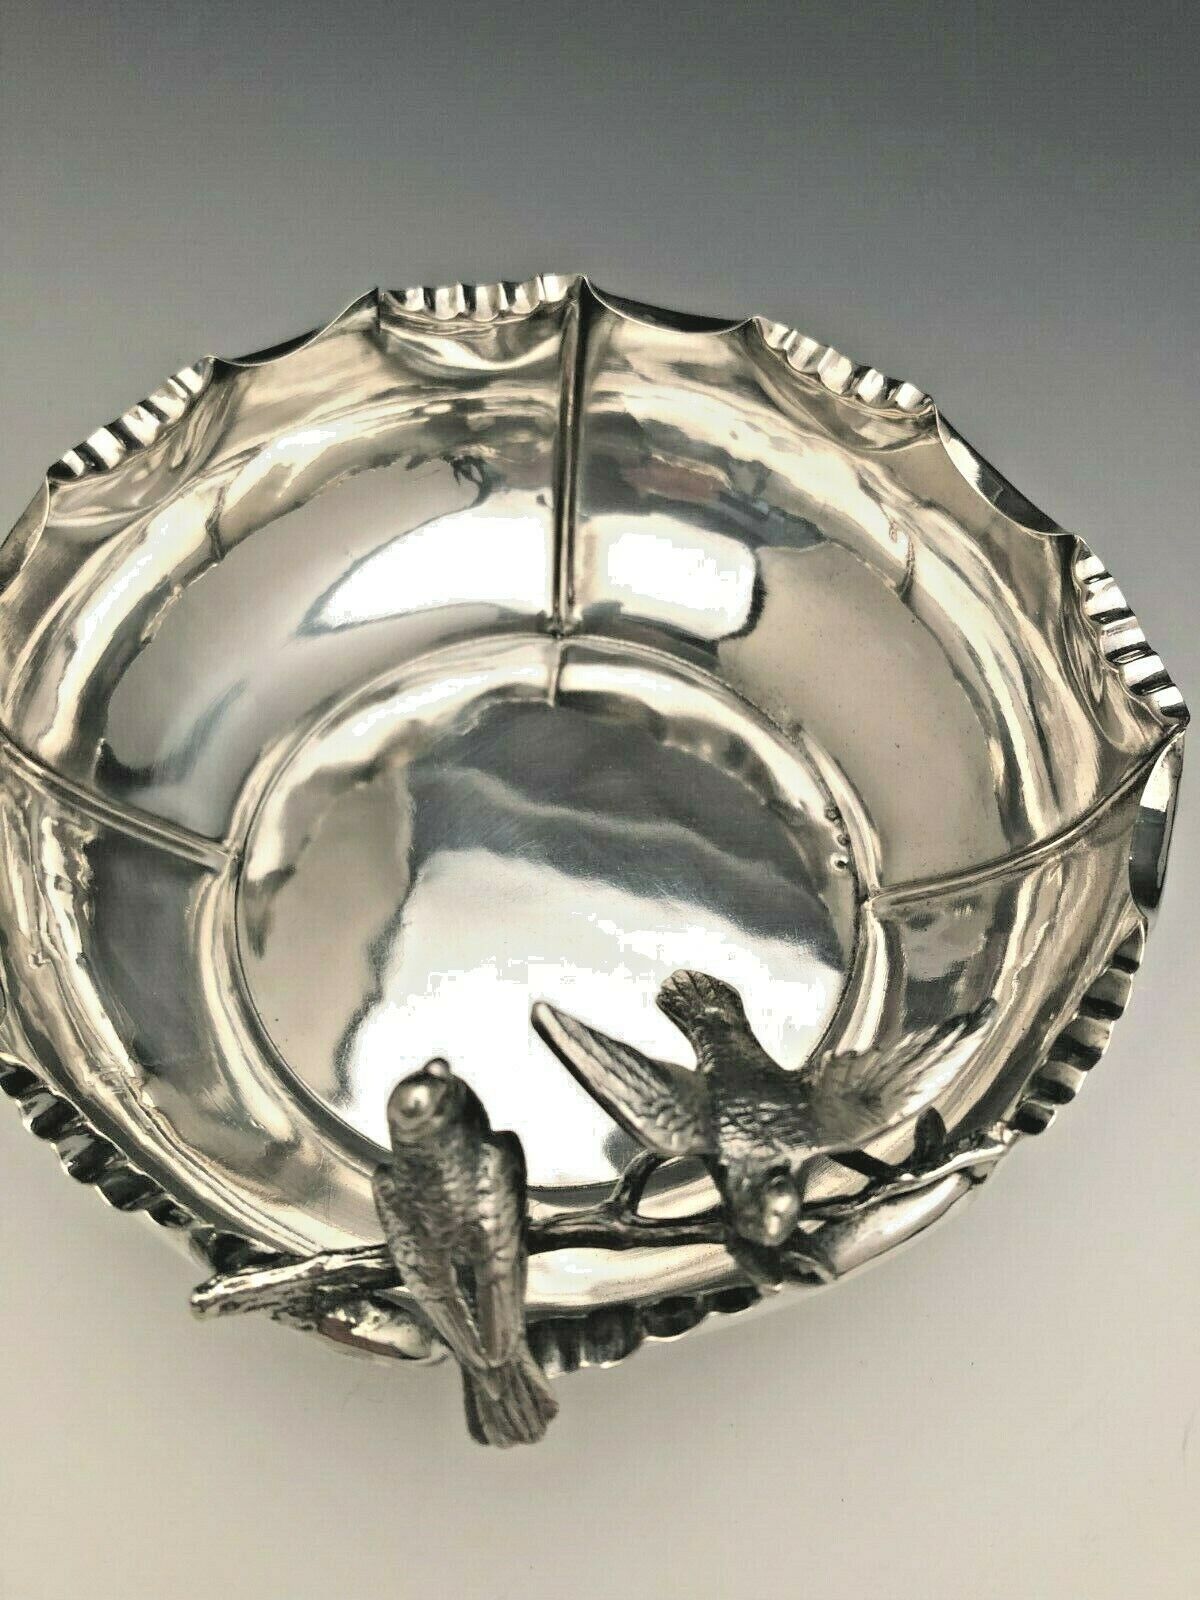 Beautiful Sterling Silver Bowl With Full Figure Birds Perched On The Edge